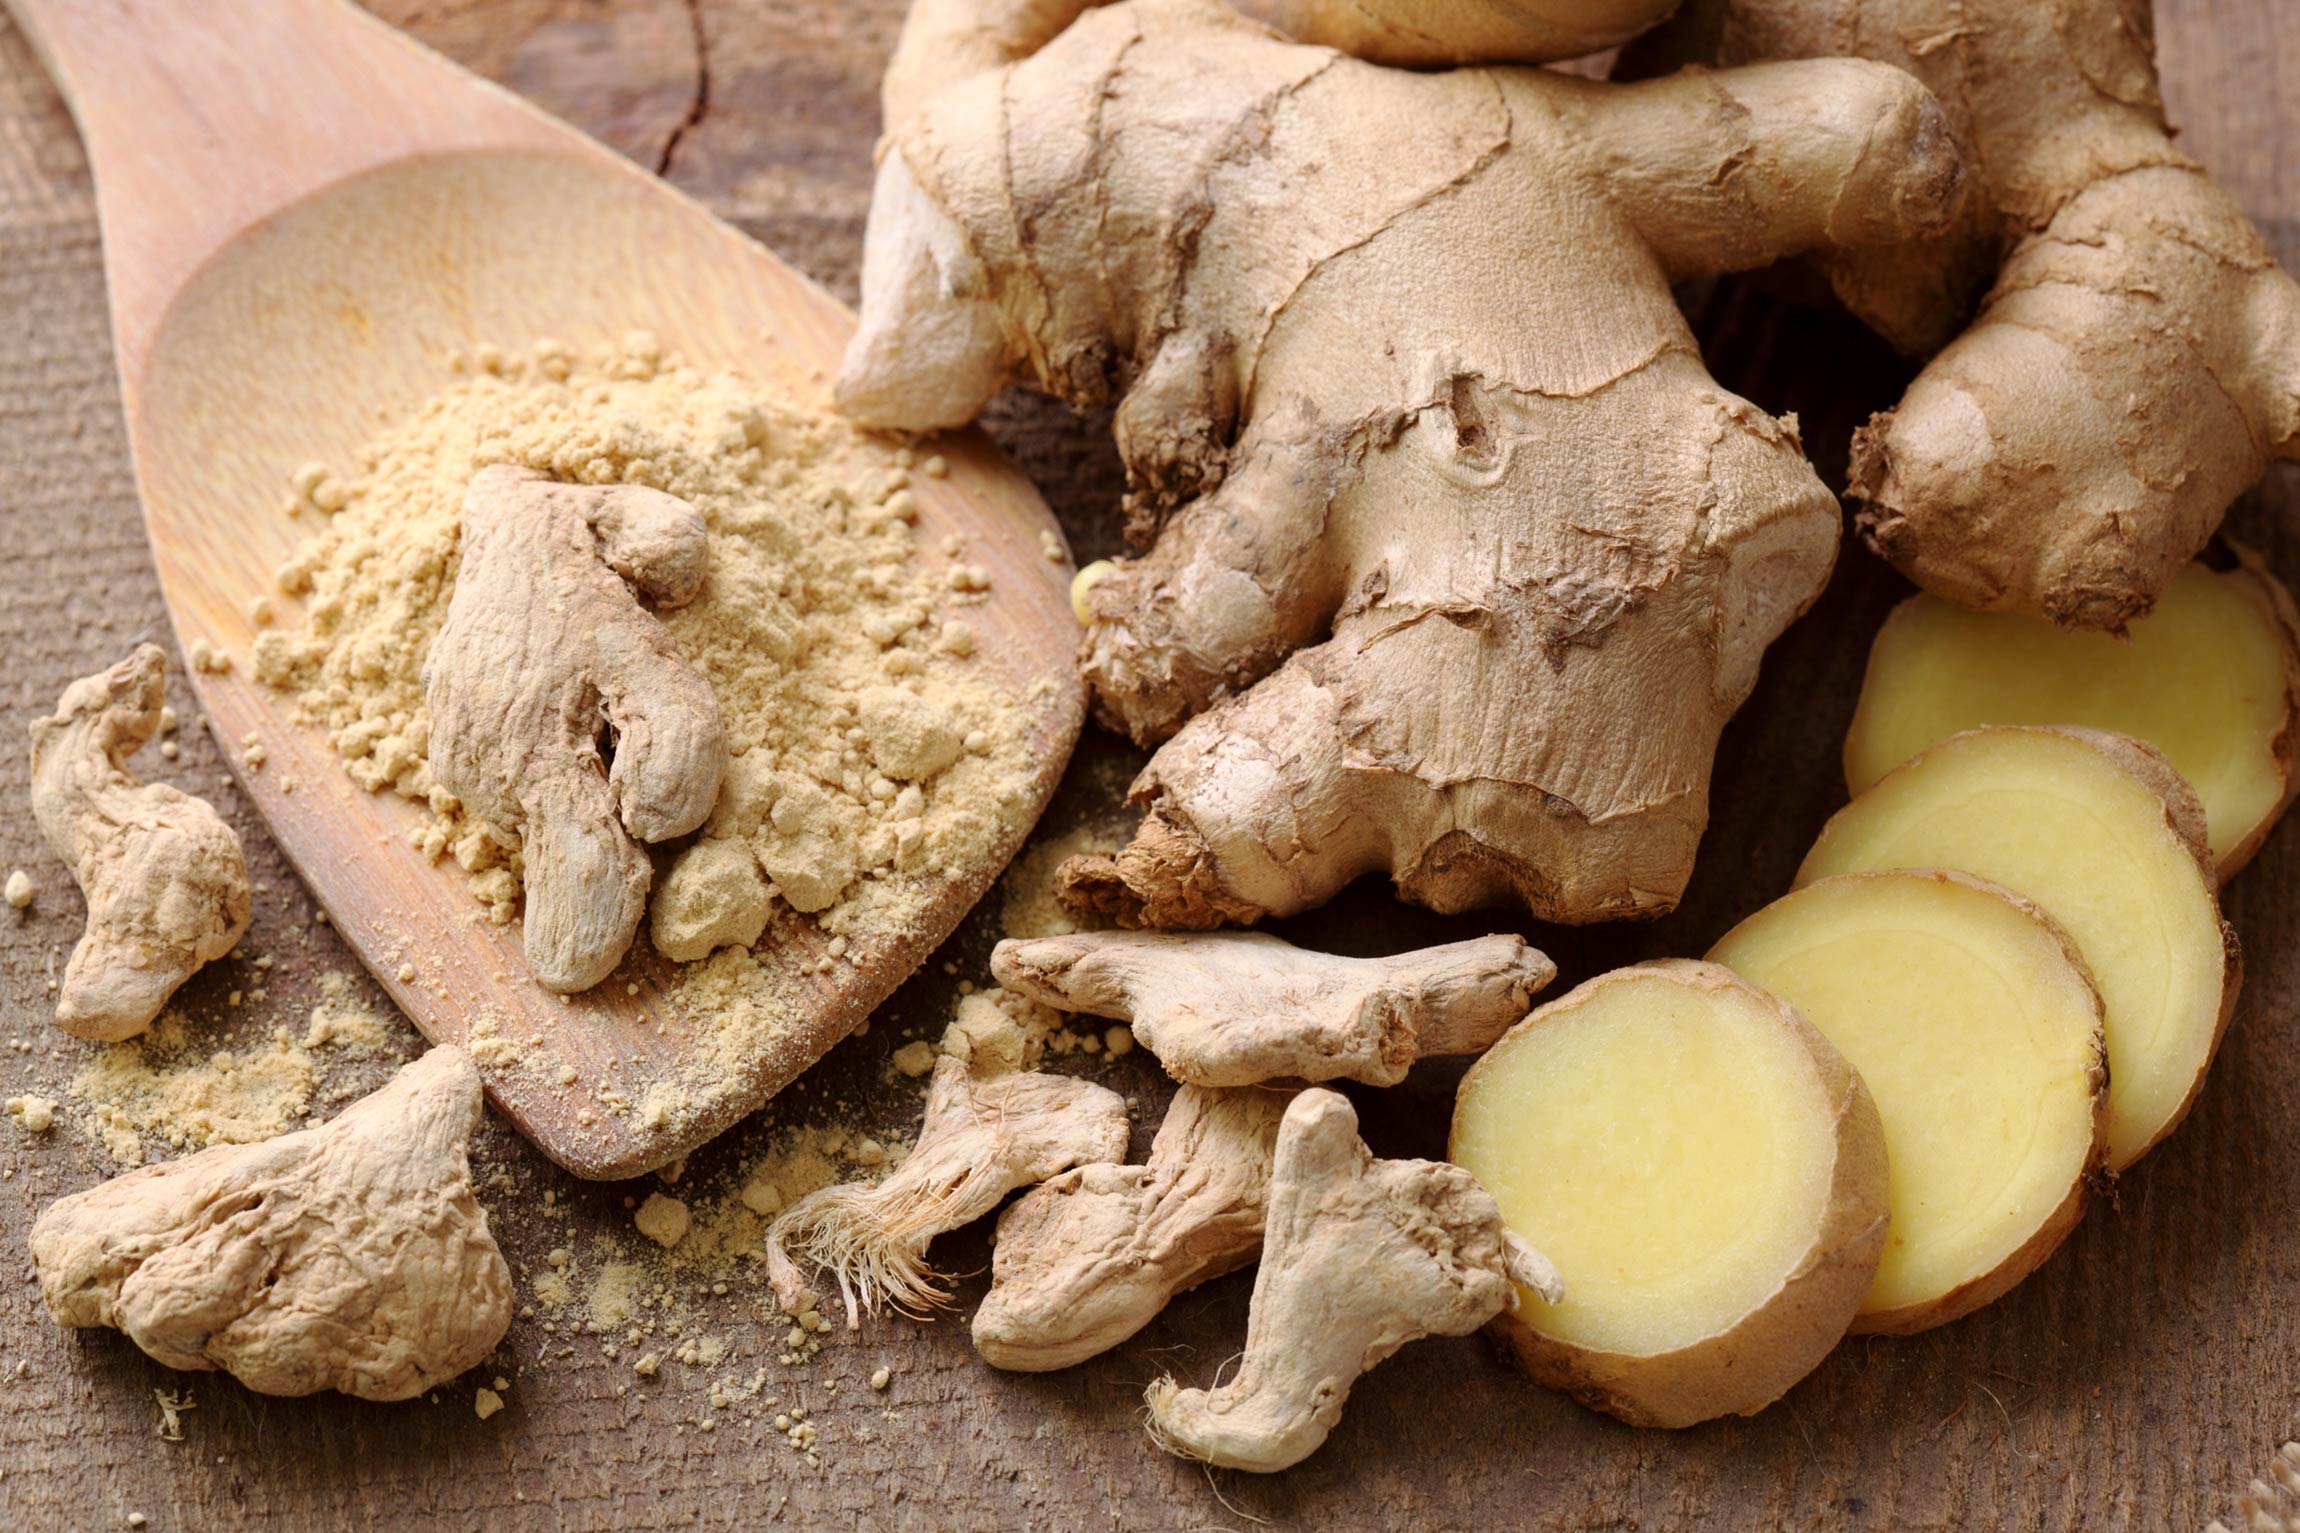 Healthy spices: ginger root